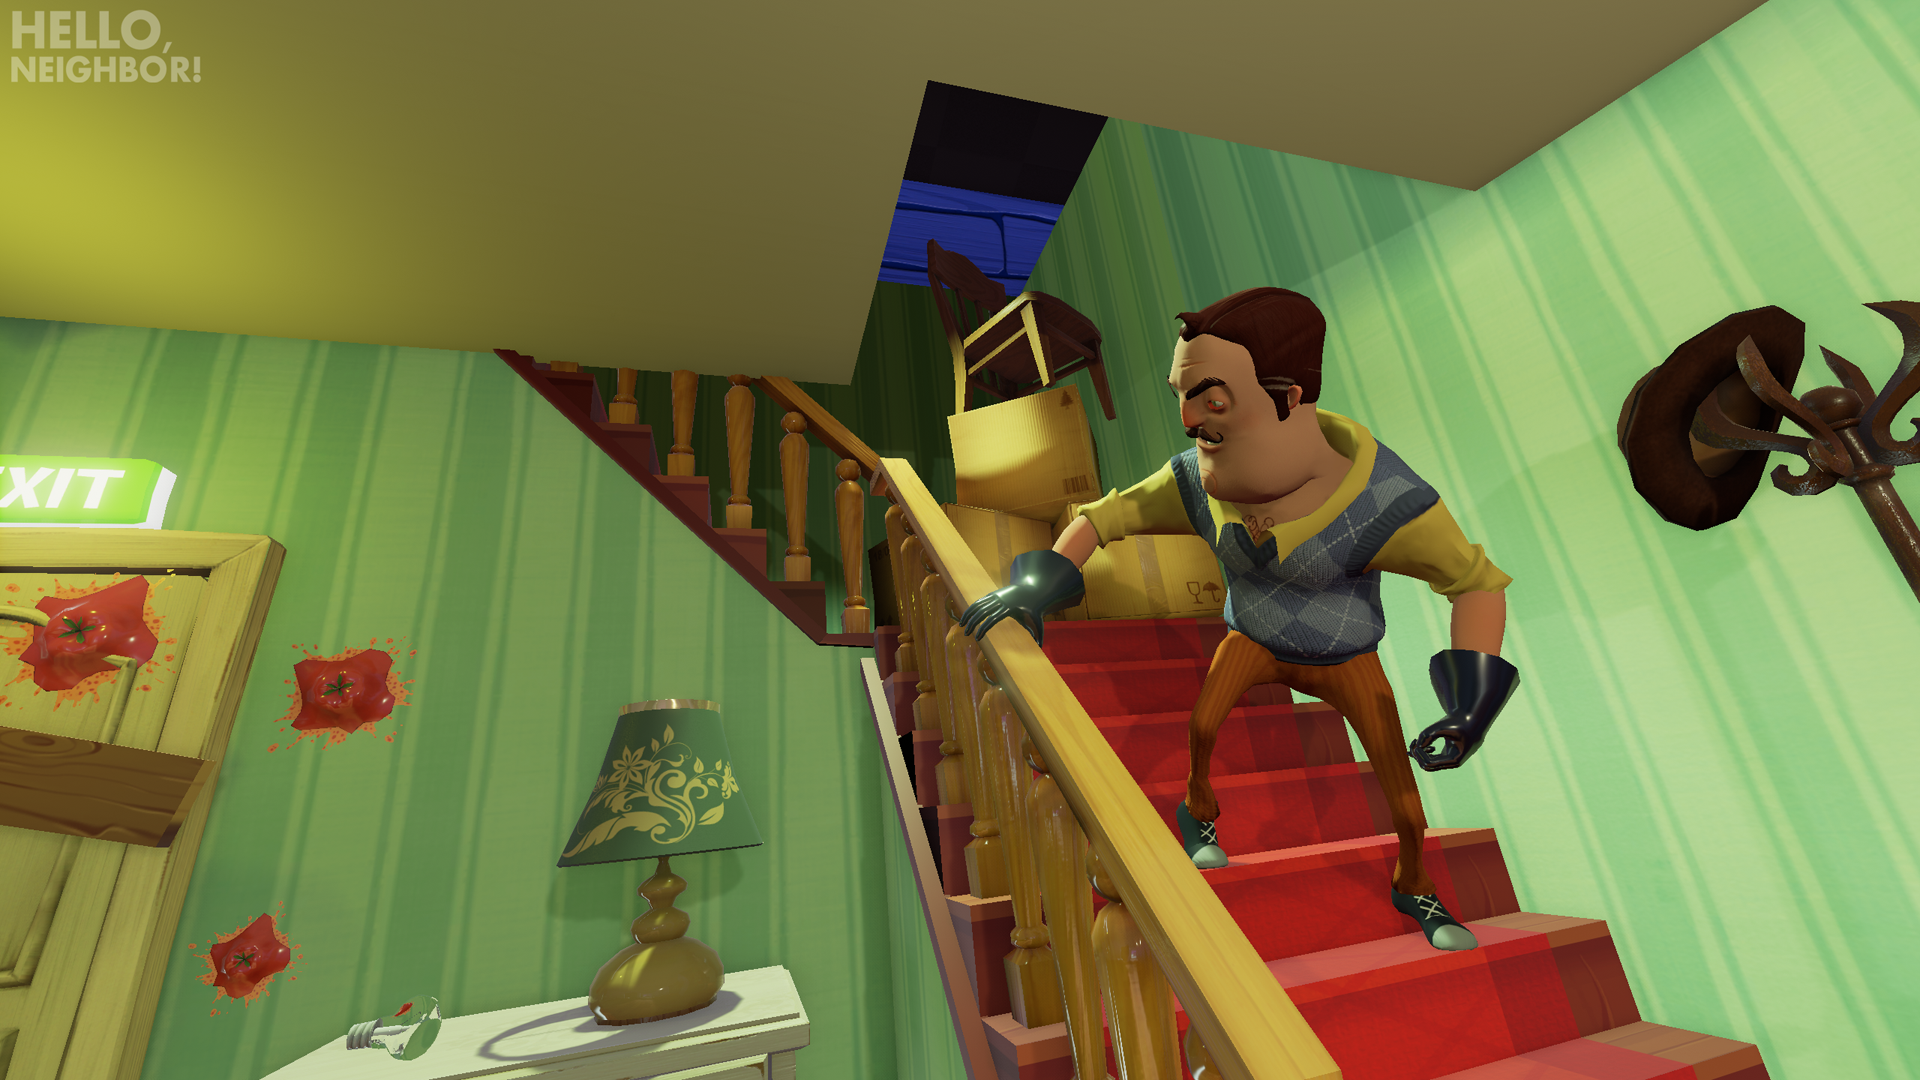 Hello Neighbor game screenshot showing character on the stairs.